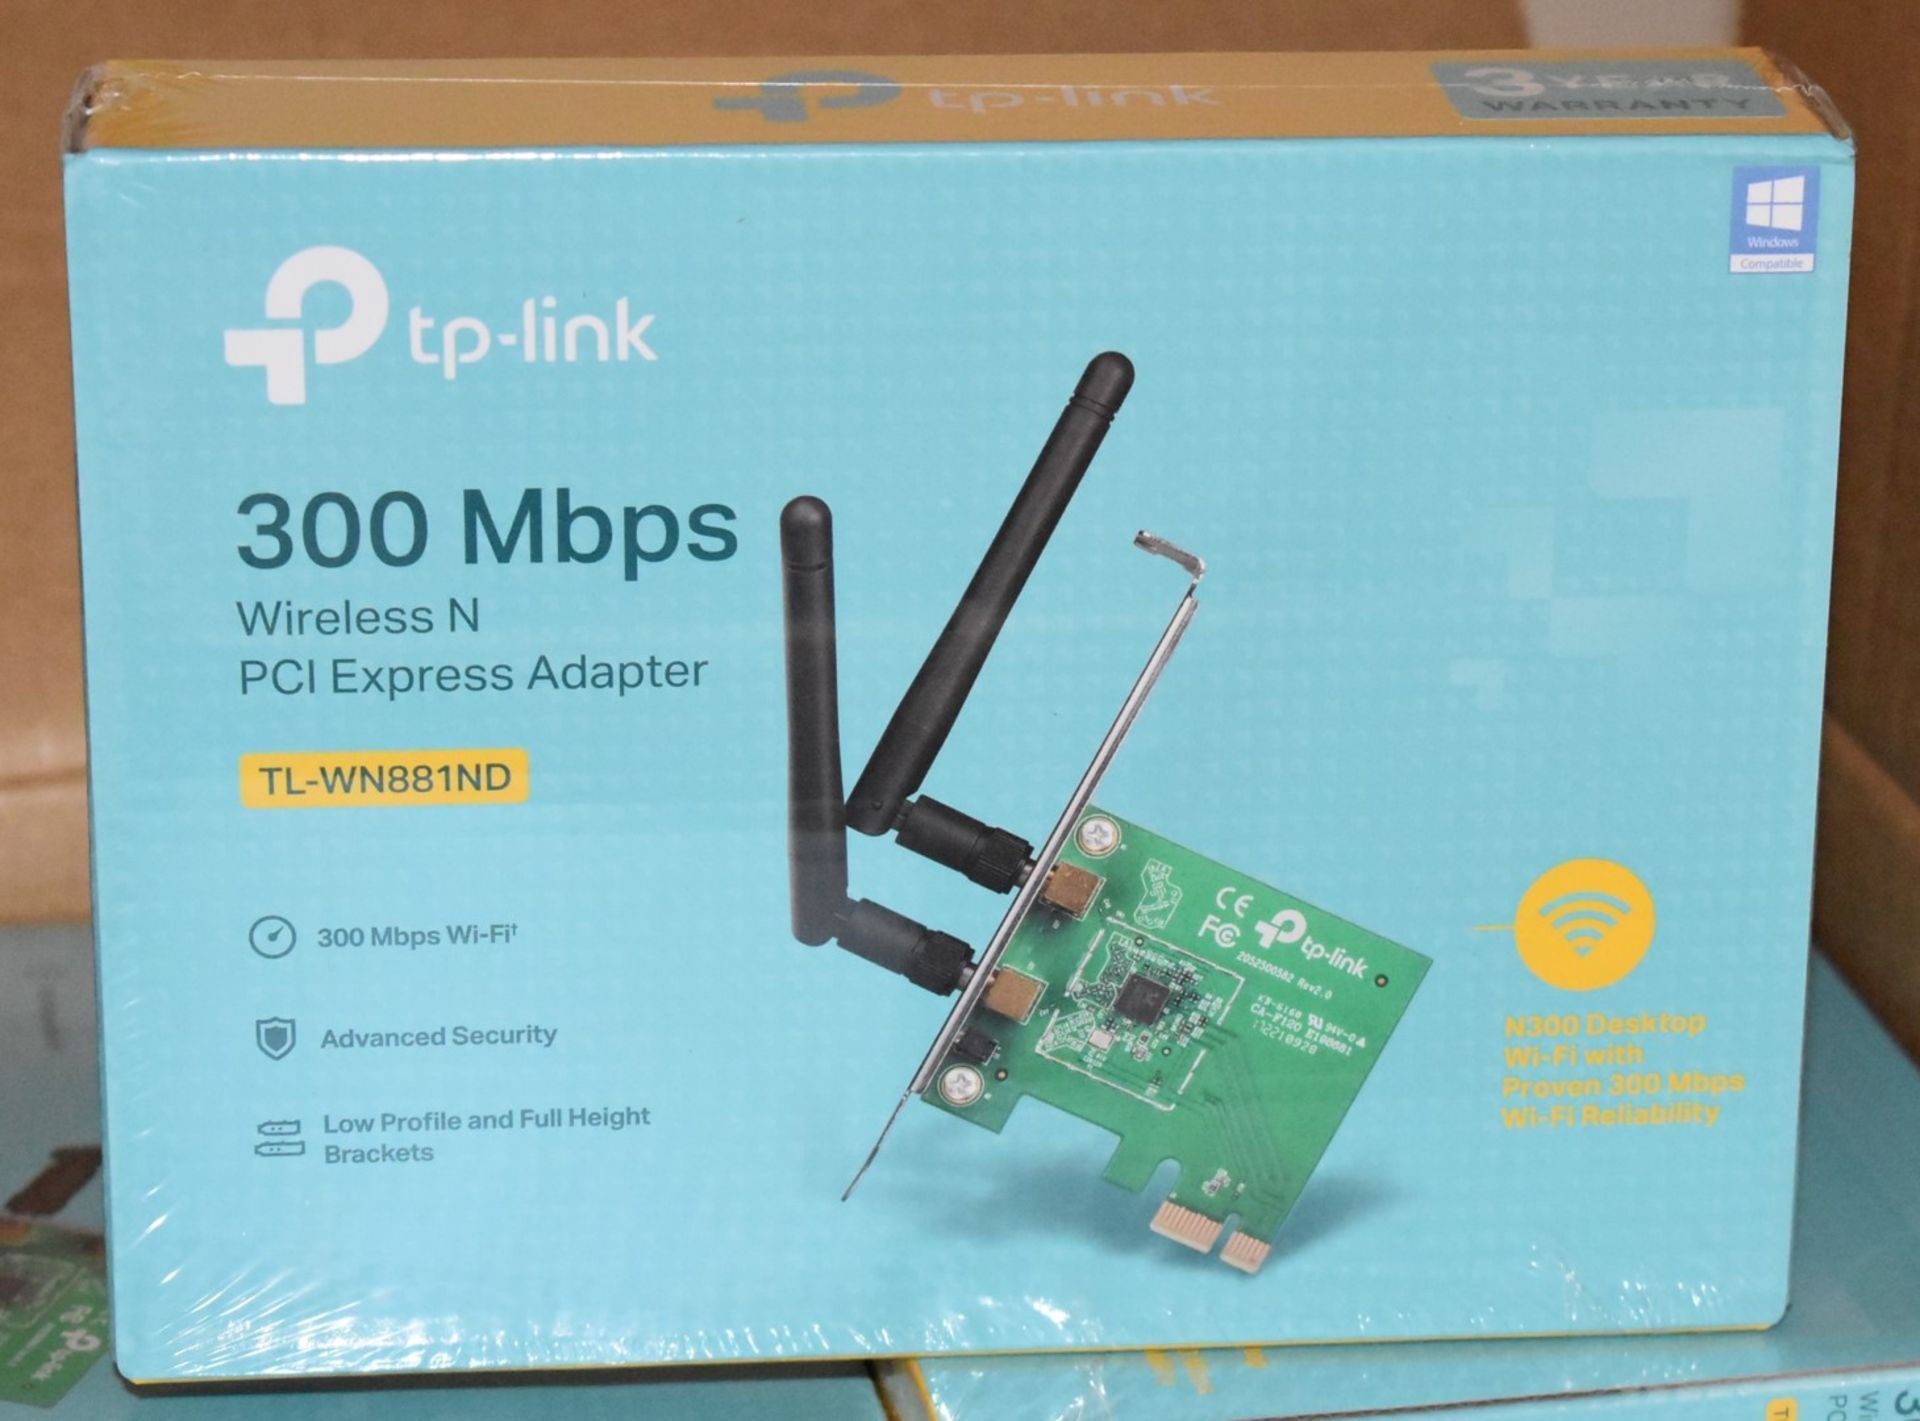 5 x TP-Link TL-WN881ND 300mbps Wireless N Pci Express Adapters - New Boxed Stock - RRP £80 - Image 3 of 4